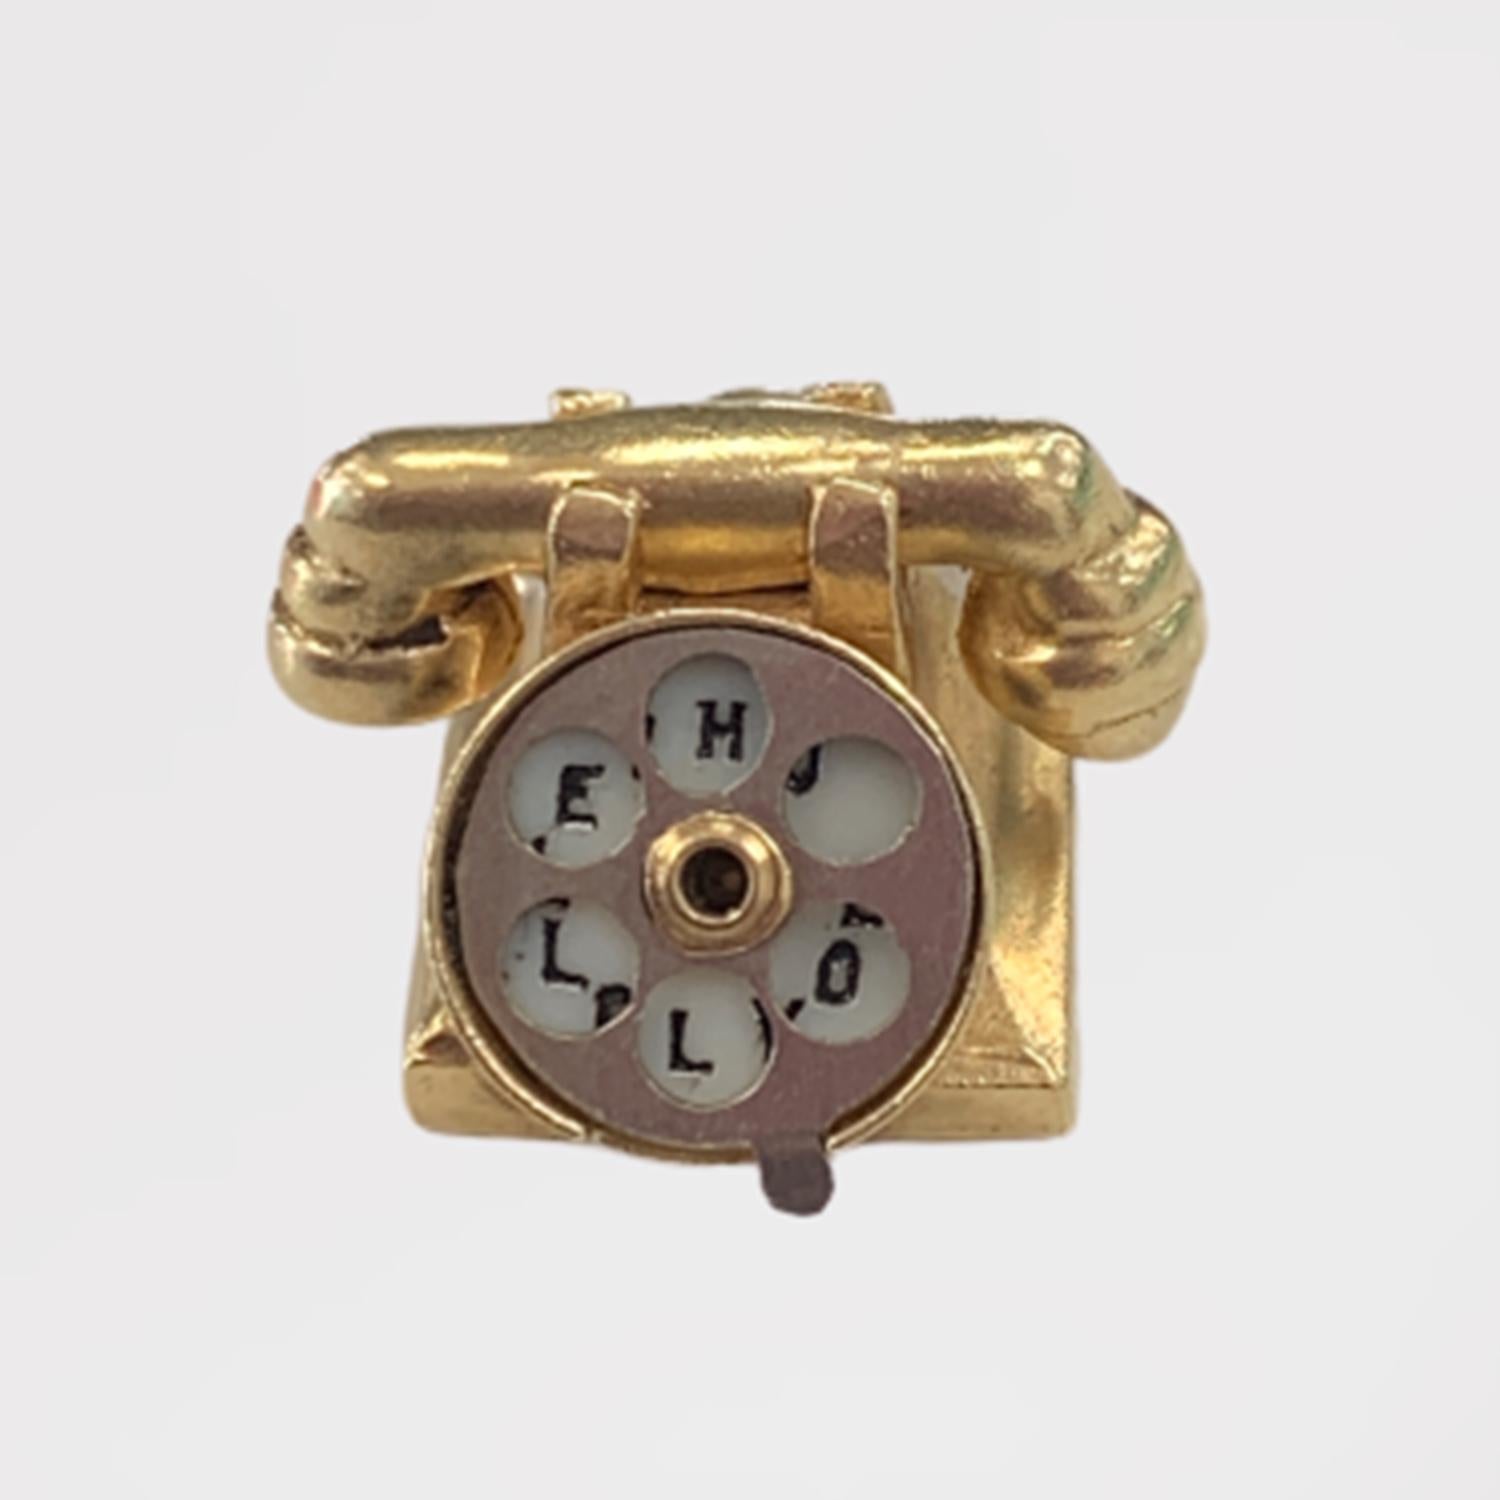 Vintage Rotary Telephone Charm circa 1930-40's

Crafted of solid 14K yellow gold, this lovely little telephone has some hidden secrets to share. The rotary dial actually rotates and shows two different messages depending on the position of the dial.